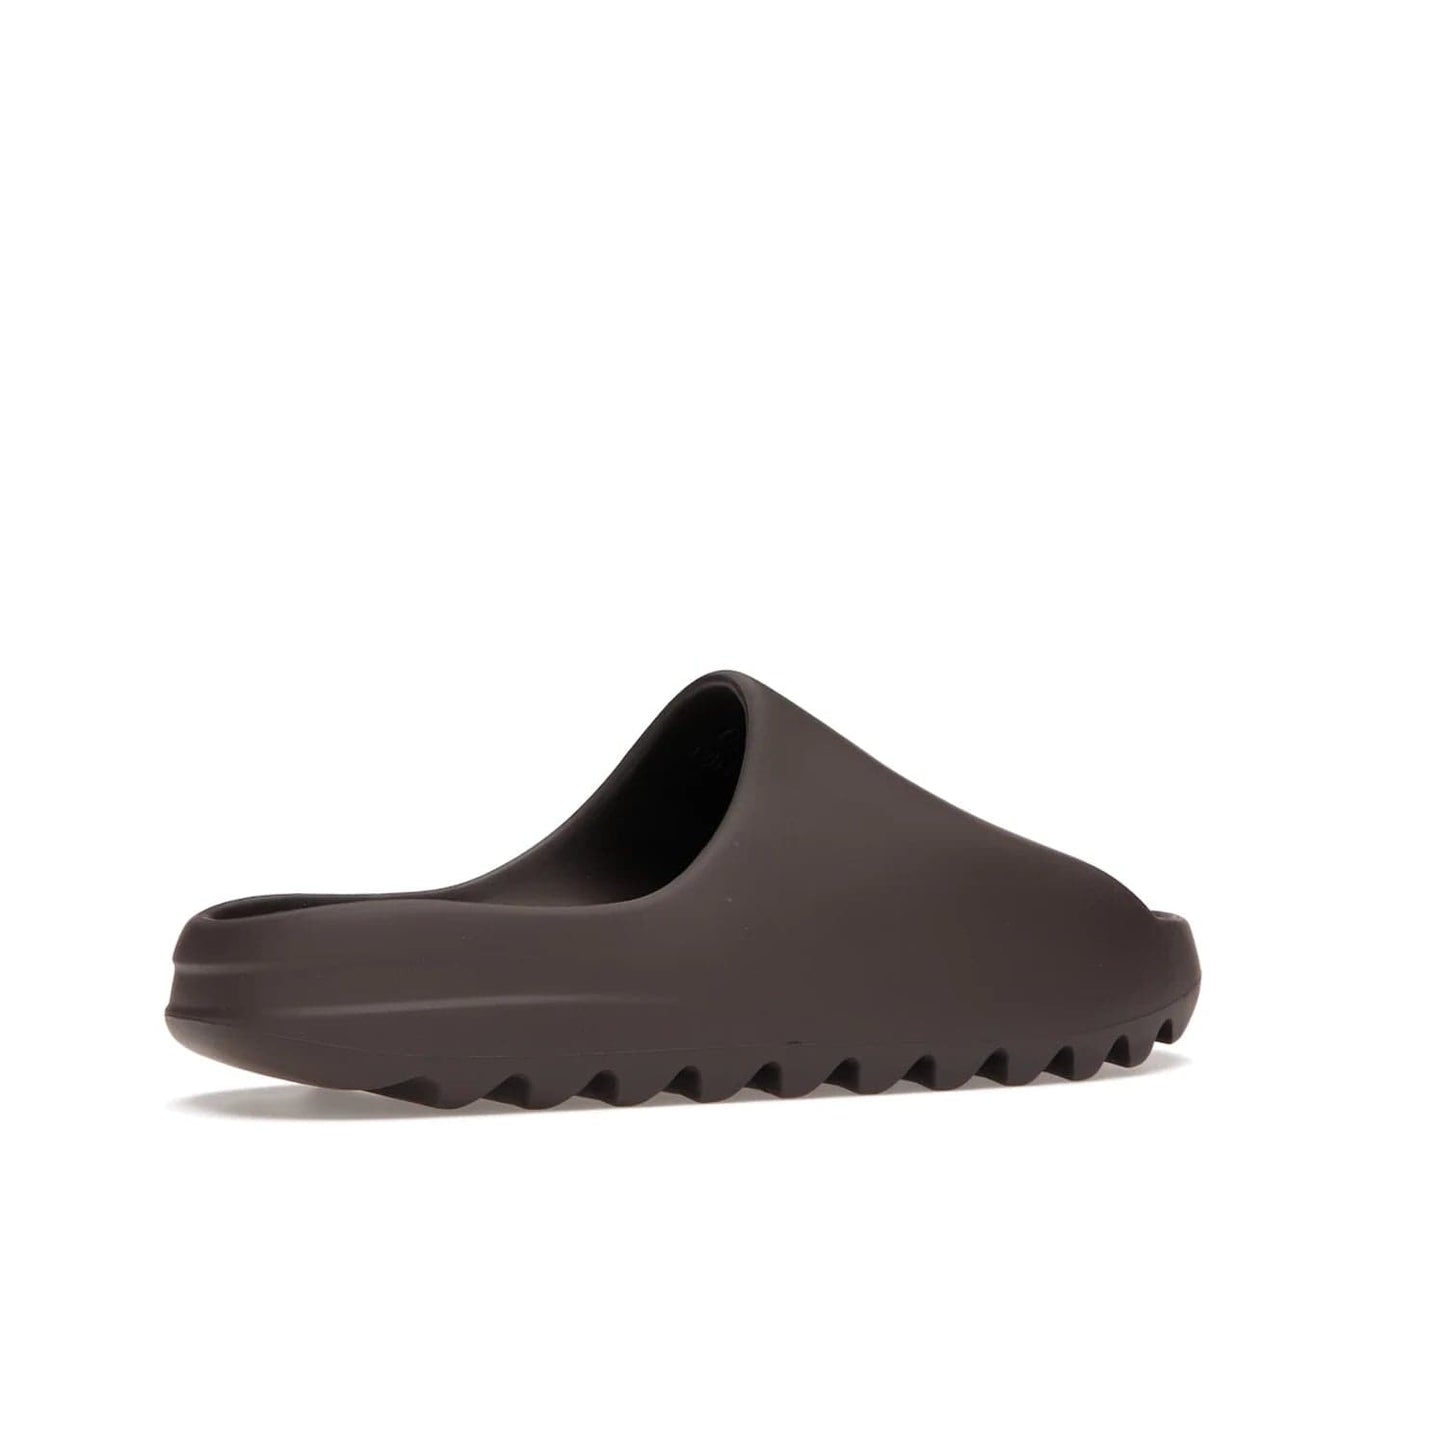 adidas Yeezy Slide Soot - Image 34 - Only at www.BallersClubKickz.com - Shop the Yeezy Slide Soot sneaker by Adidas, a sleek blend of form and function. Monochrome silhouette in Soot/Soot/Soot. Lightweight EVA foam offers comfort and durability. Get the must-have style today.